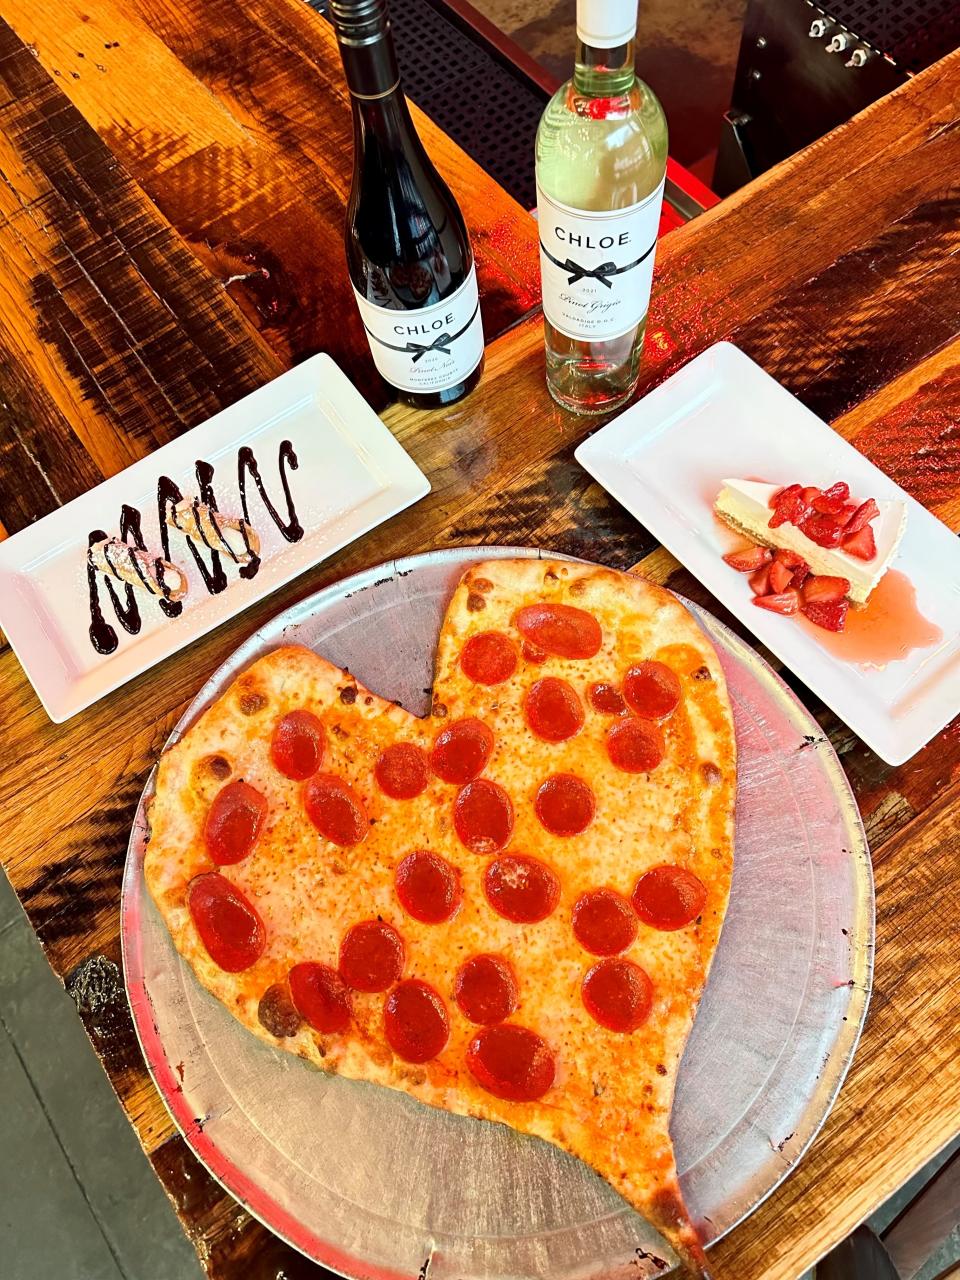 On February 14, Aldo's Pizza Pies will be serving a Valentine's special for two that includes a heart-shaped pizza.